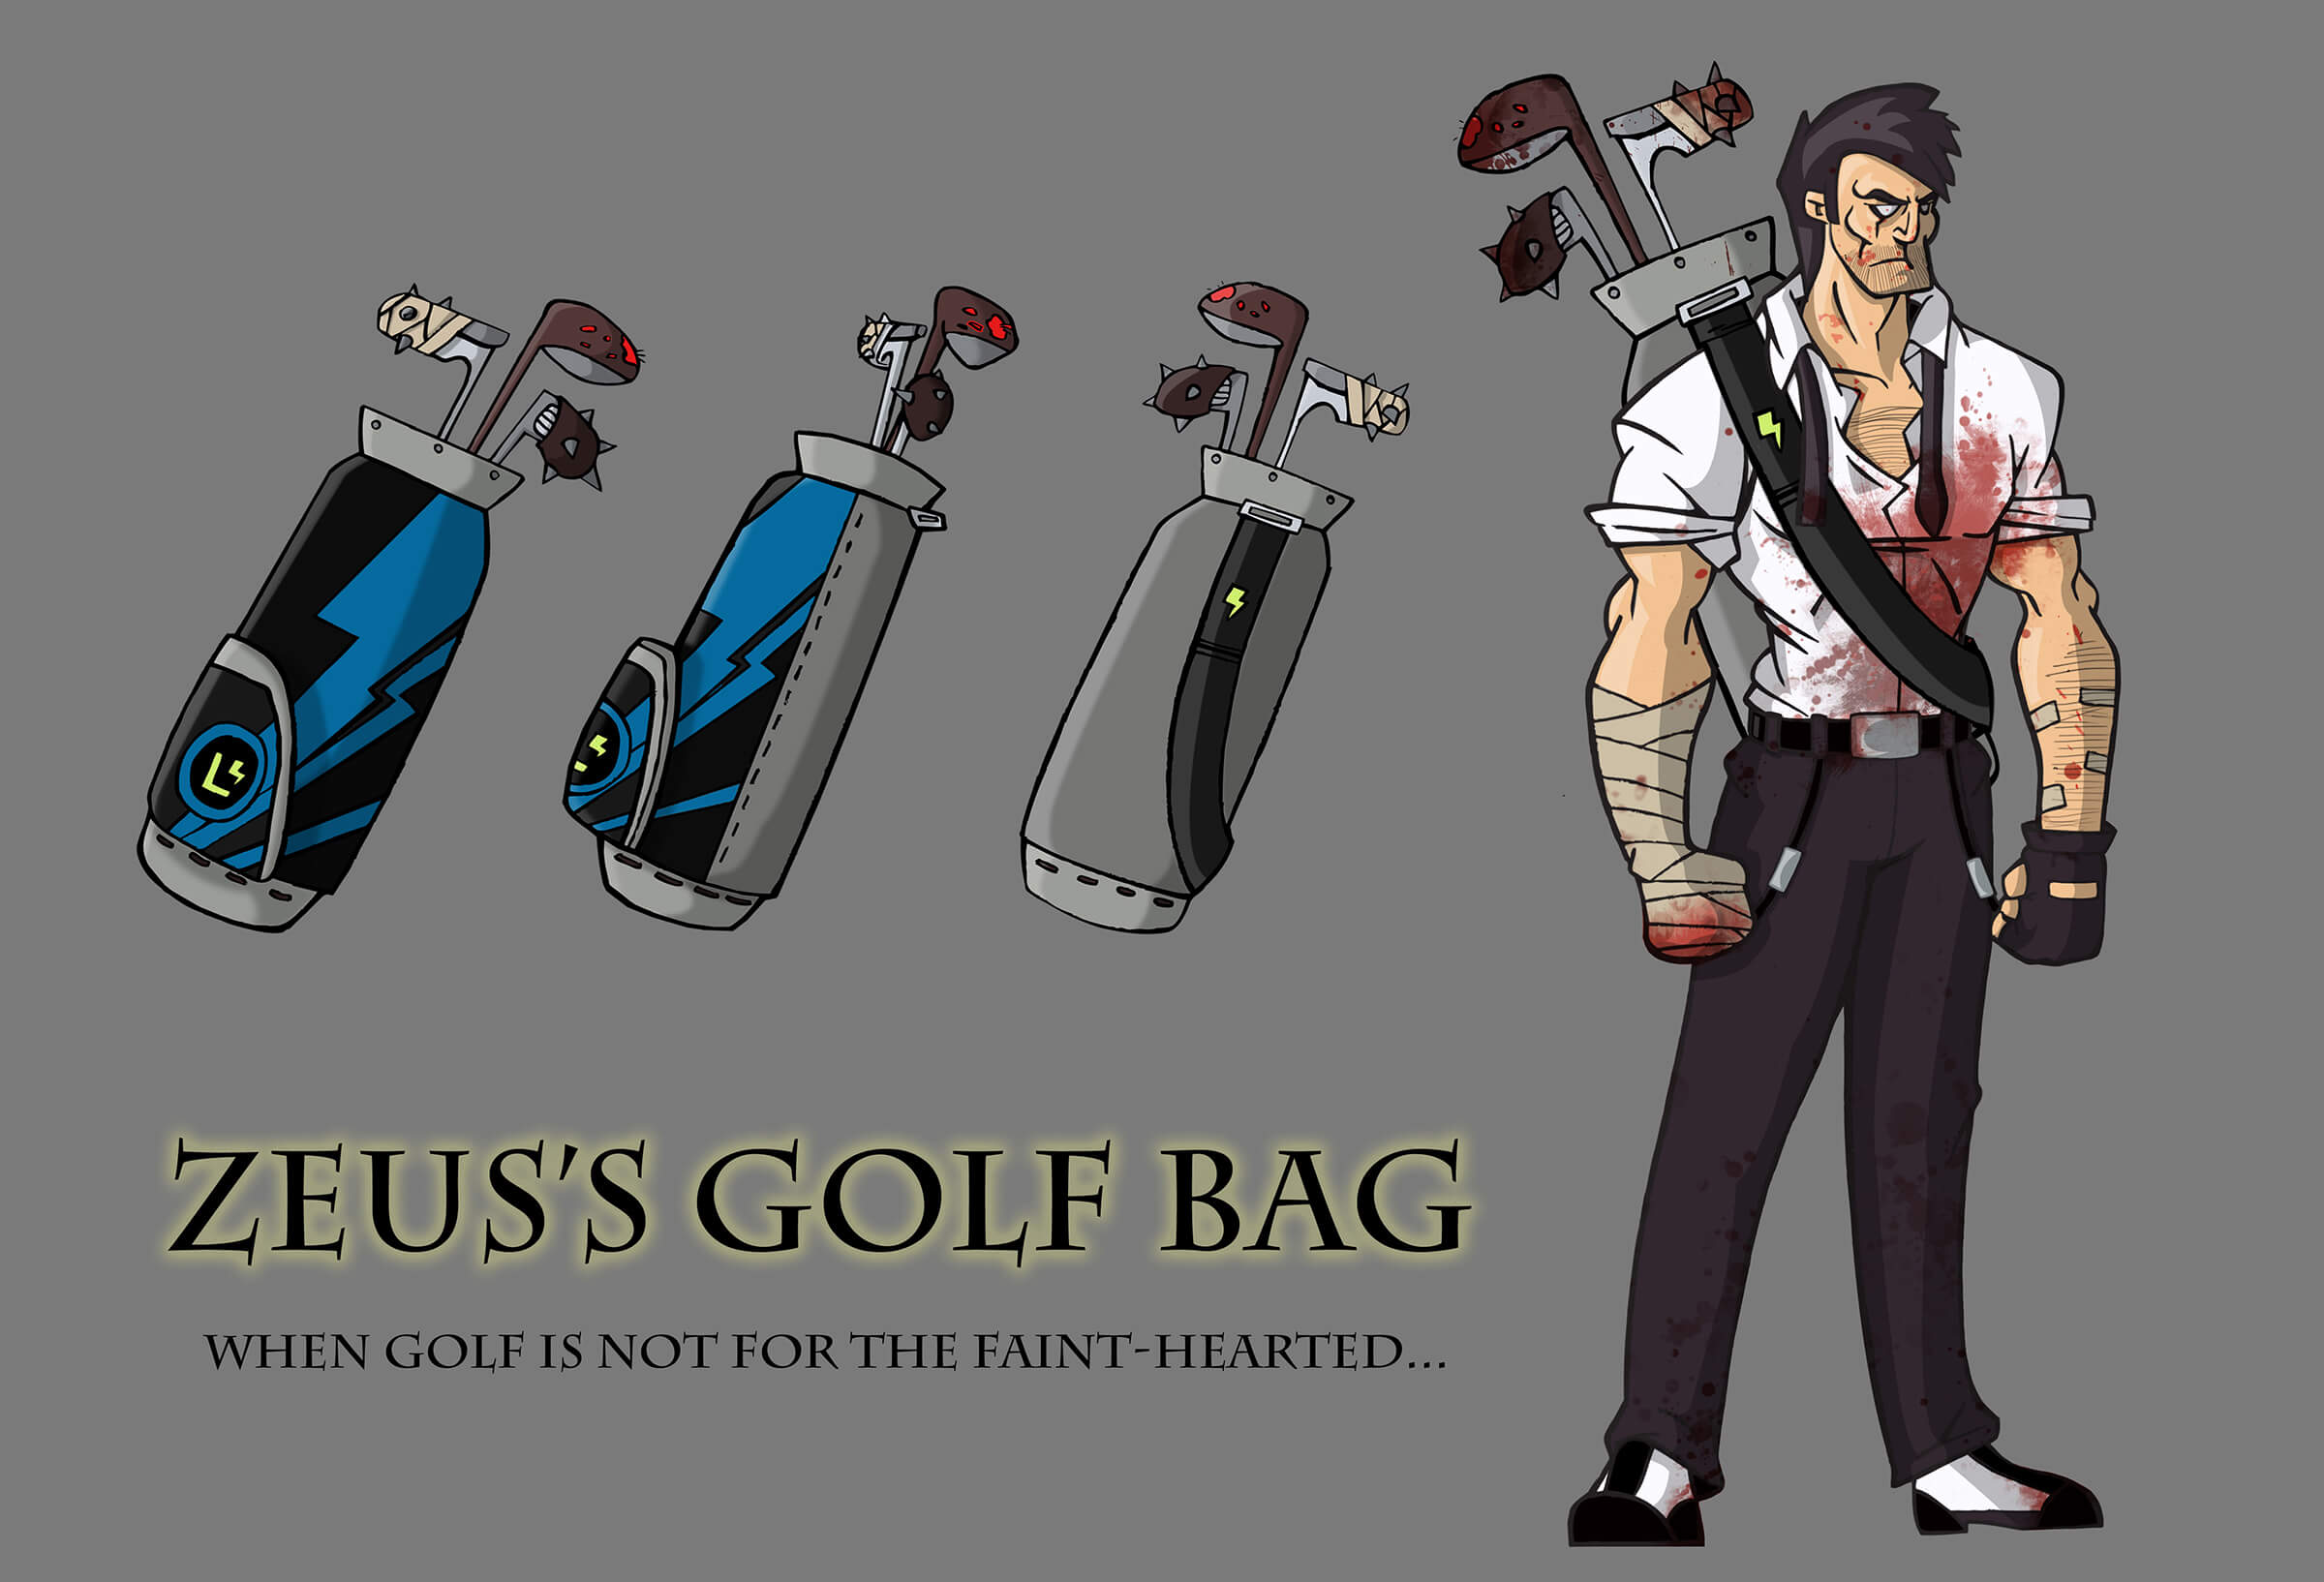 Cartoon sketches of a golf bag of threatening golf clubs, slung over the shoulder of a tall, blood-splattered man.